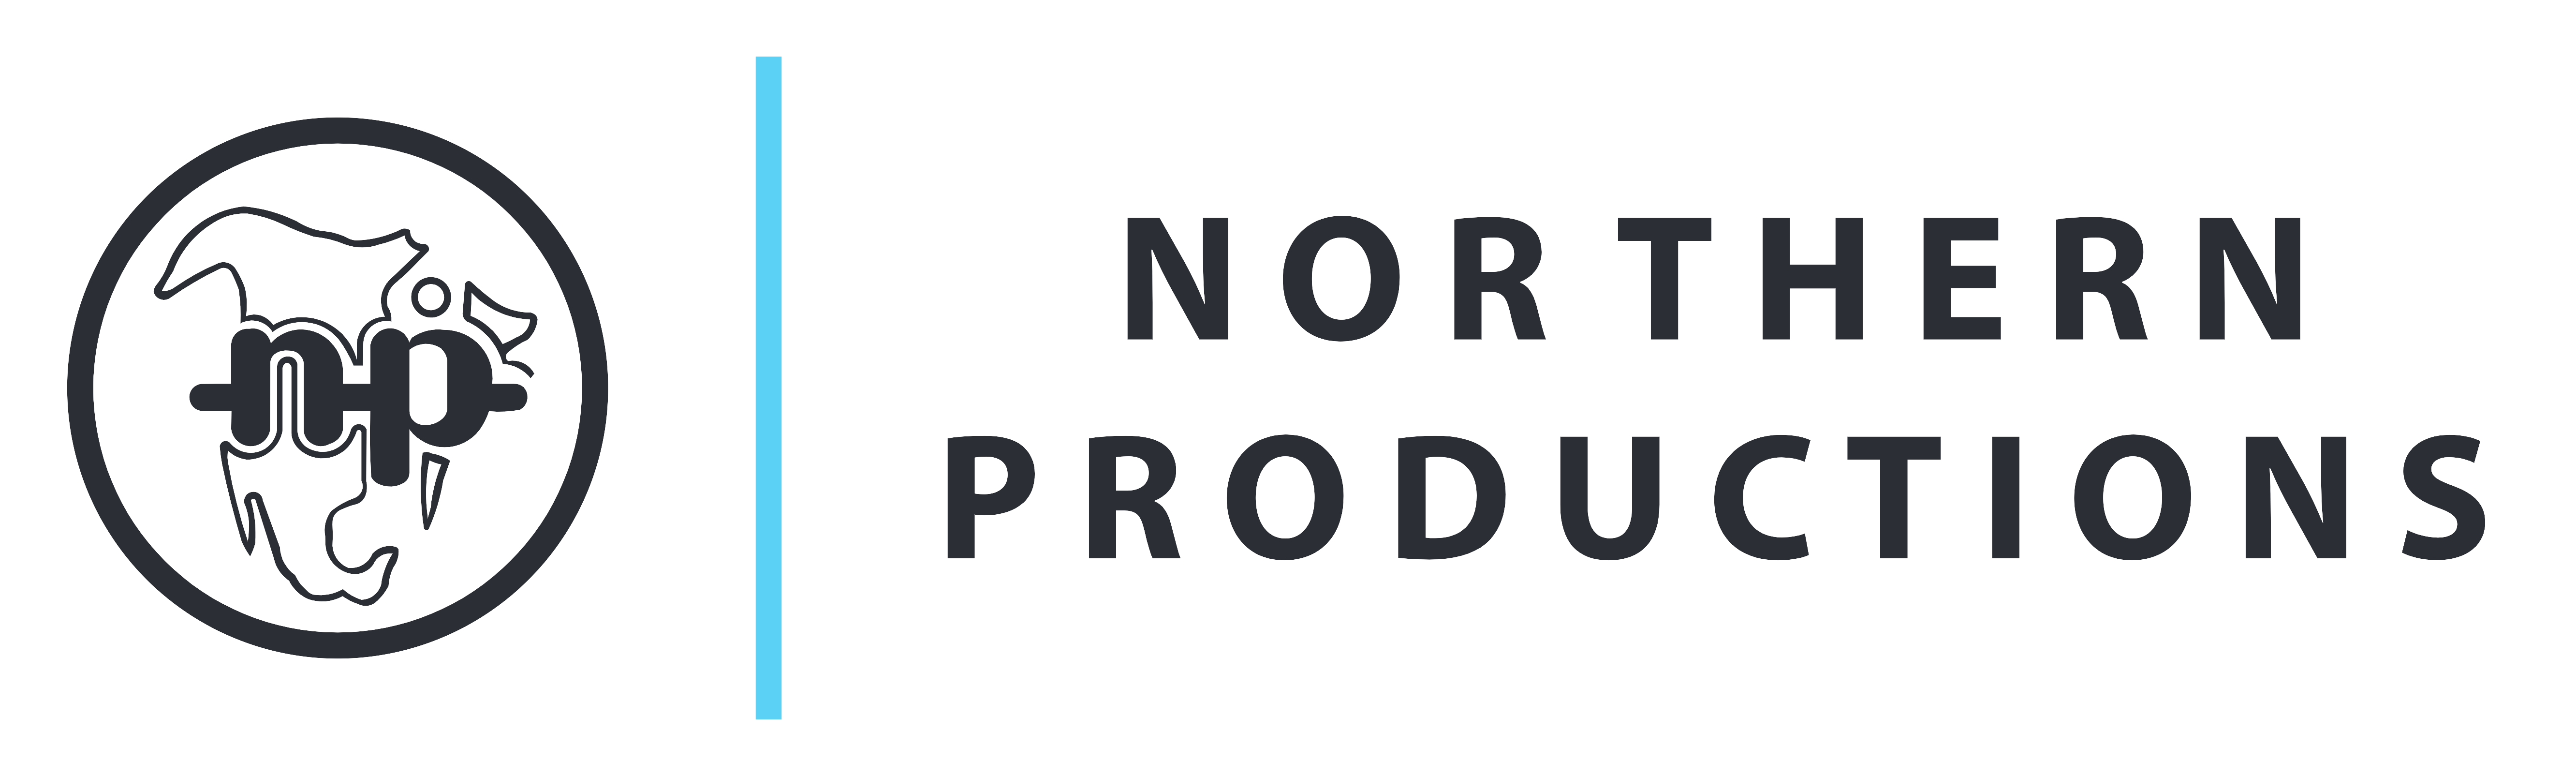 Northern Productions' logo